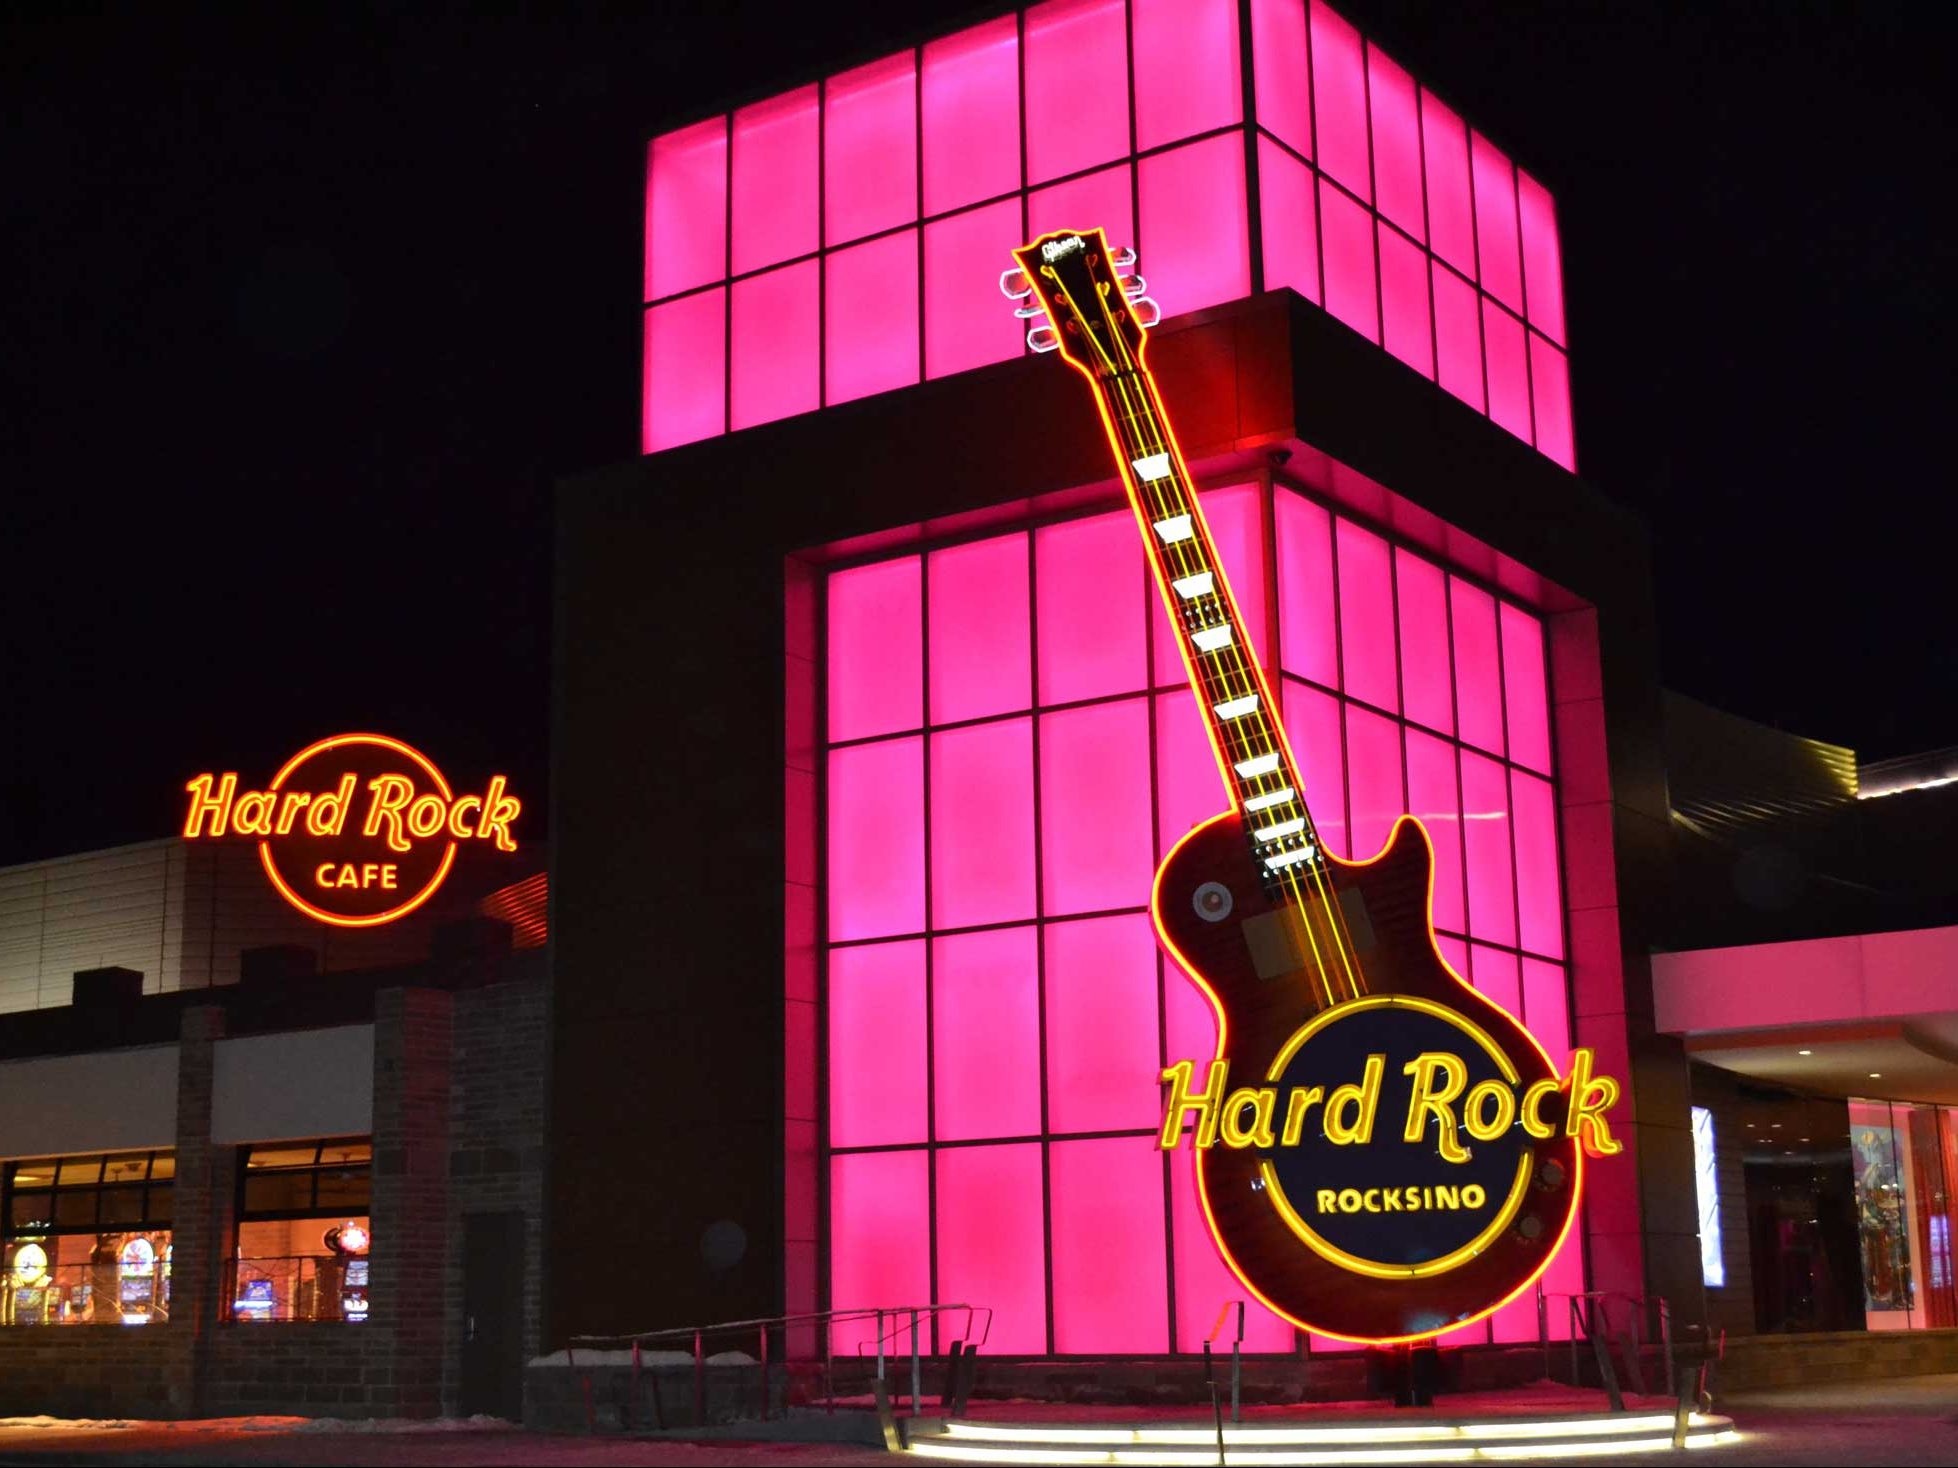 Neon signs at the Hard Rock Cafe & Rocksino in Cleveland